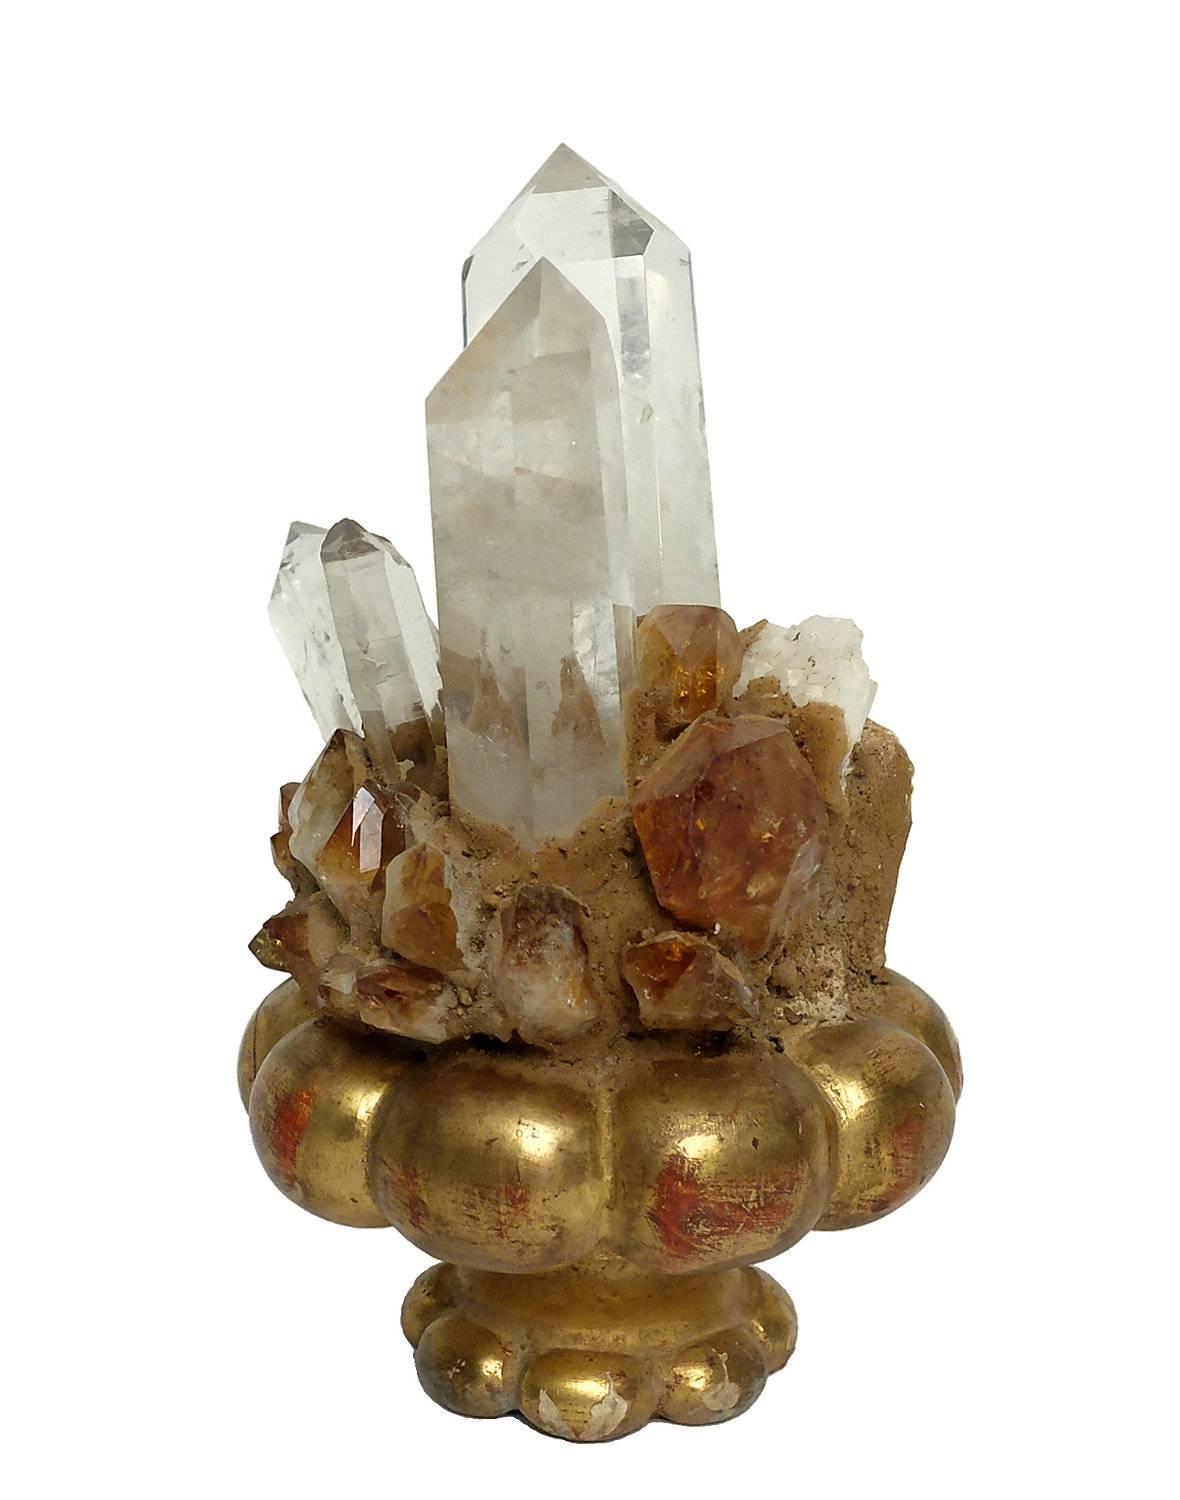 A Naturalia mineral specimen a rock crystals and citrine quartz druze, mounted over gold-plated carved wooden base.